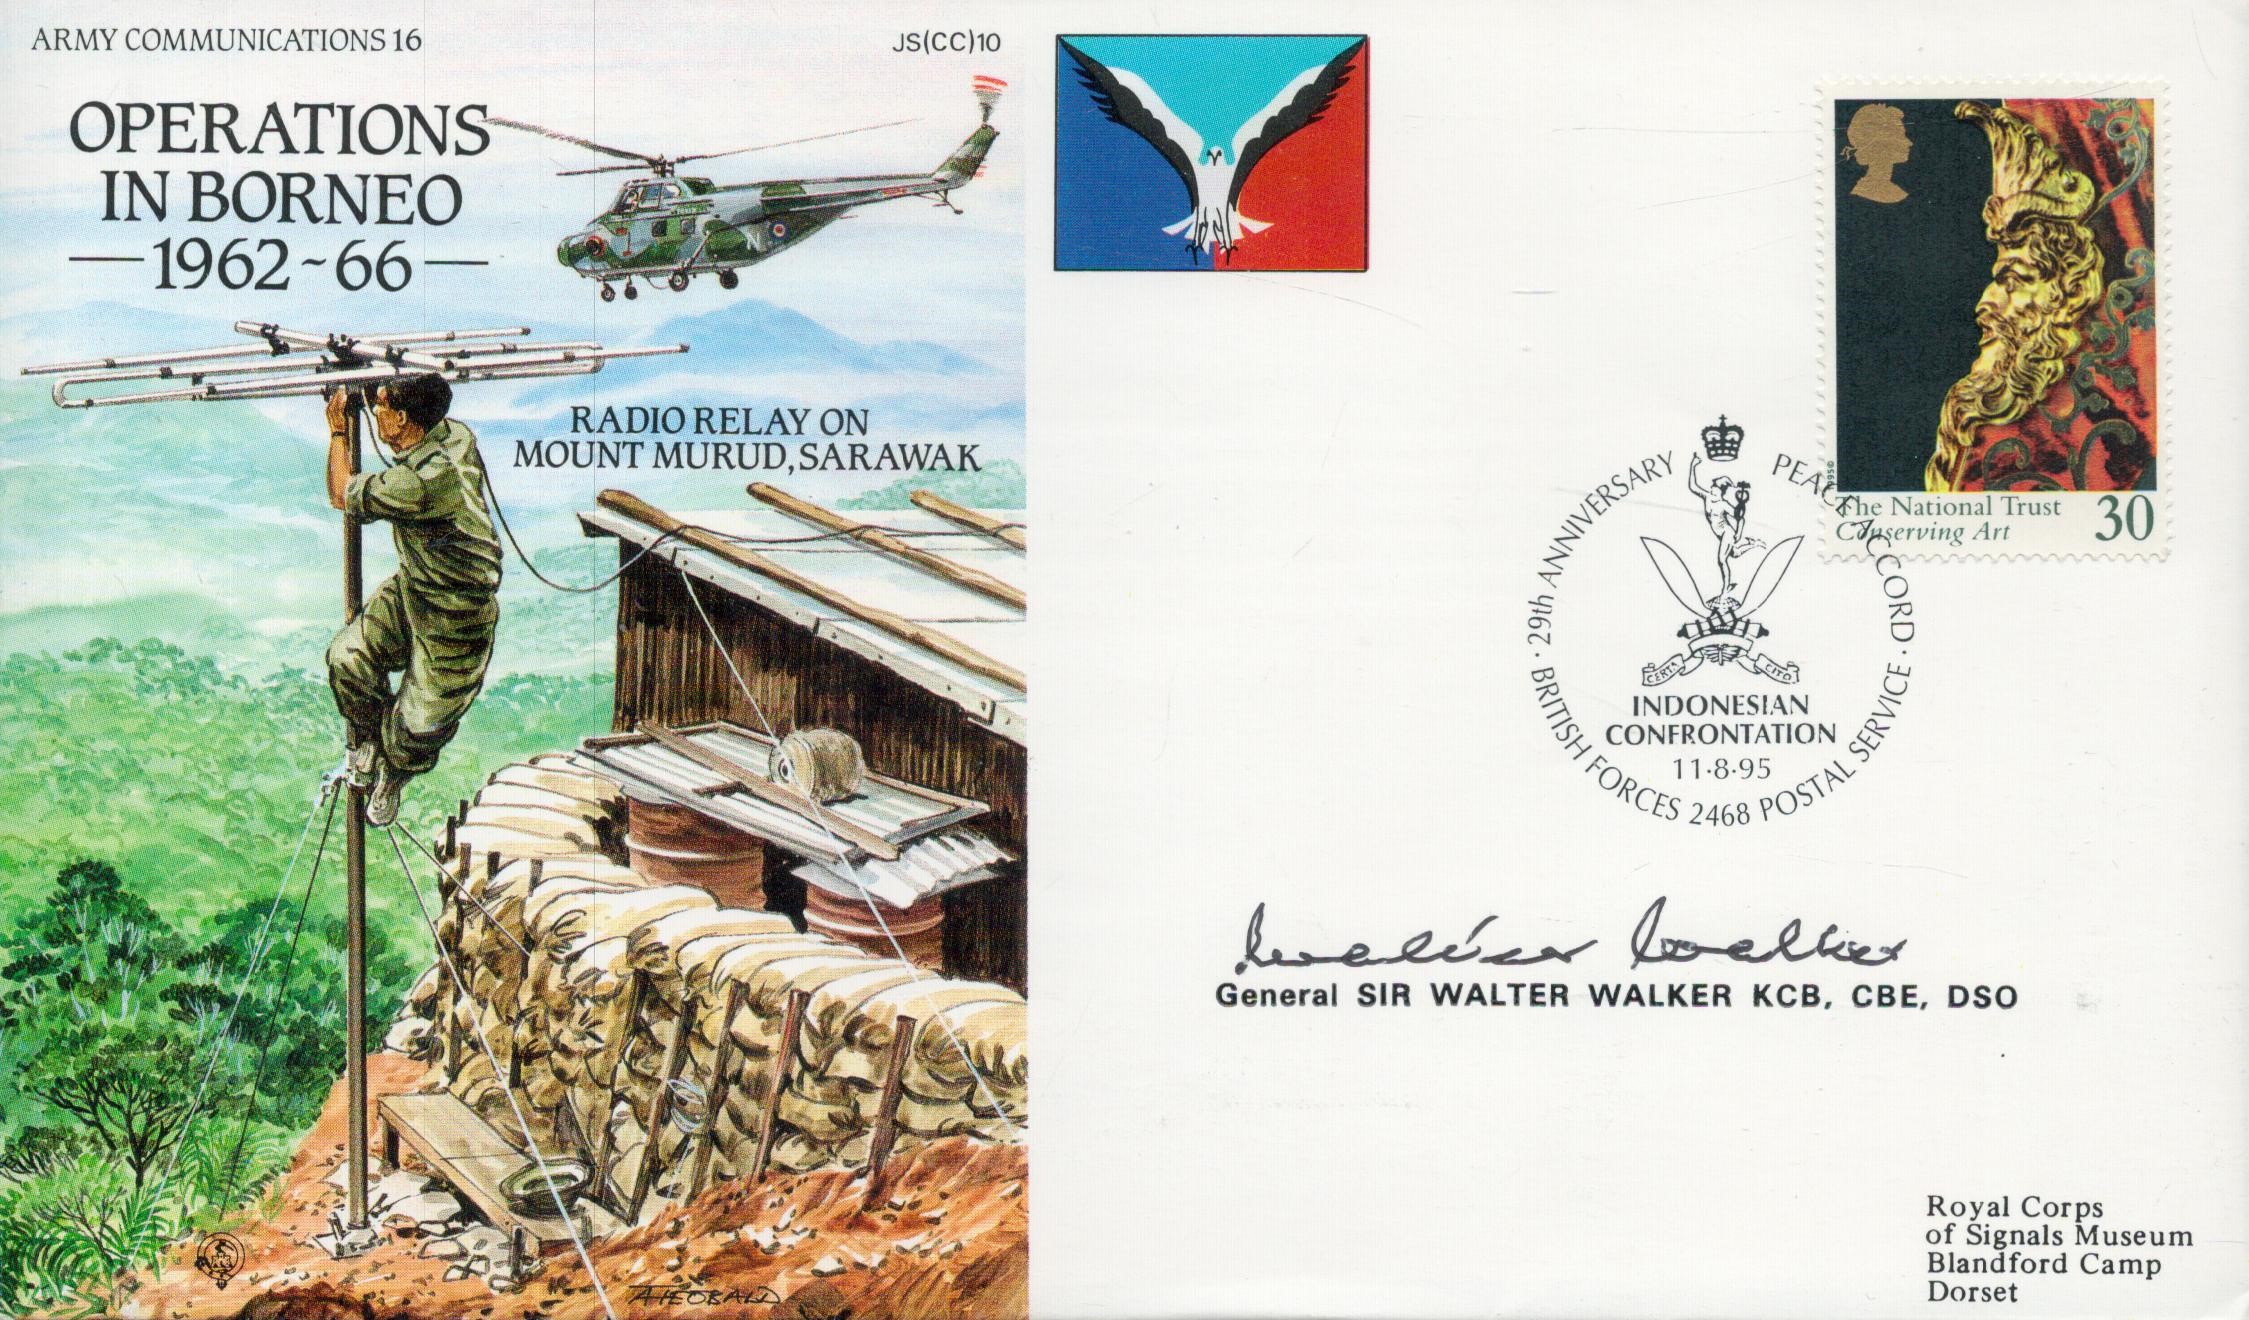 General Sir Walter Walker KCB, CBE, DSO signed Operations in Borneo 1962-66 Army Communications 16